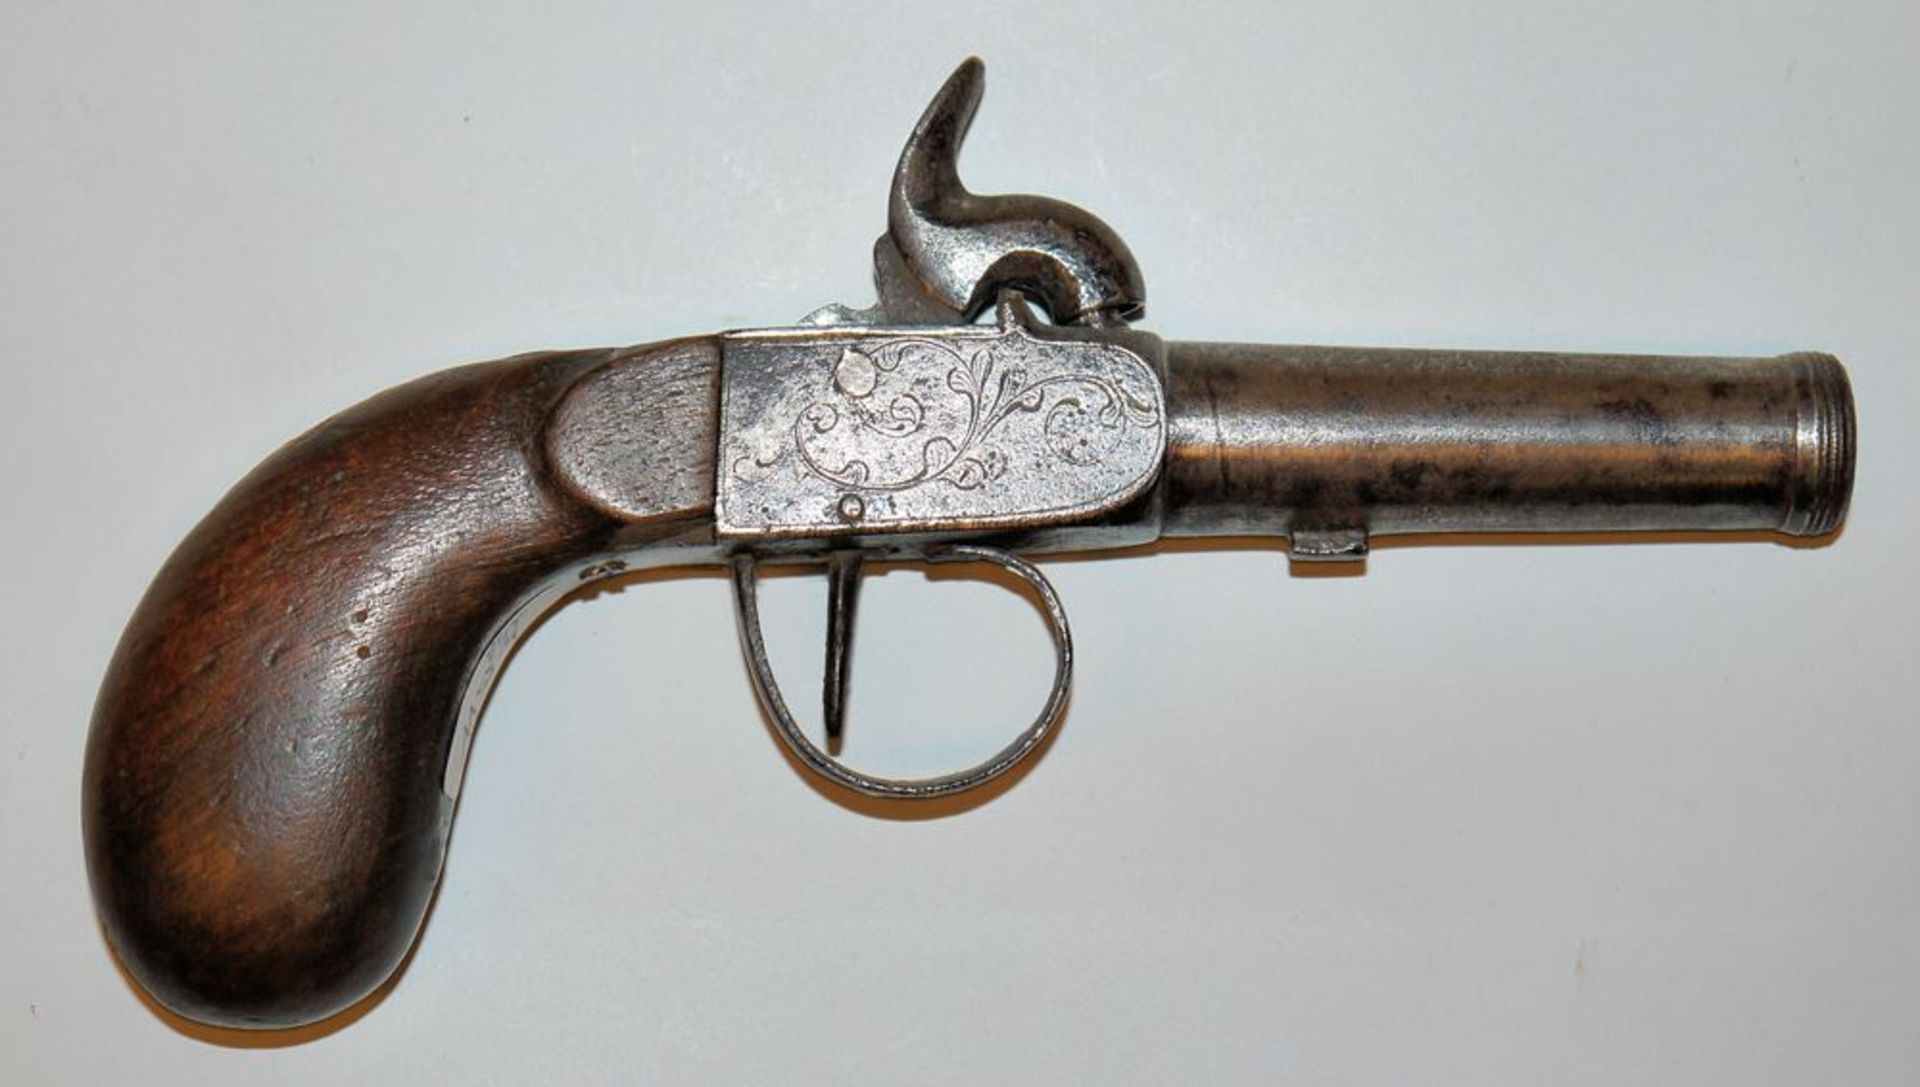 Pocket pistol with percussion lock, mid 19th century - Image 2 of 2